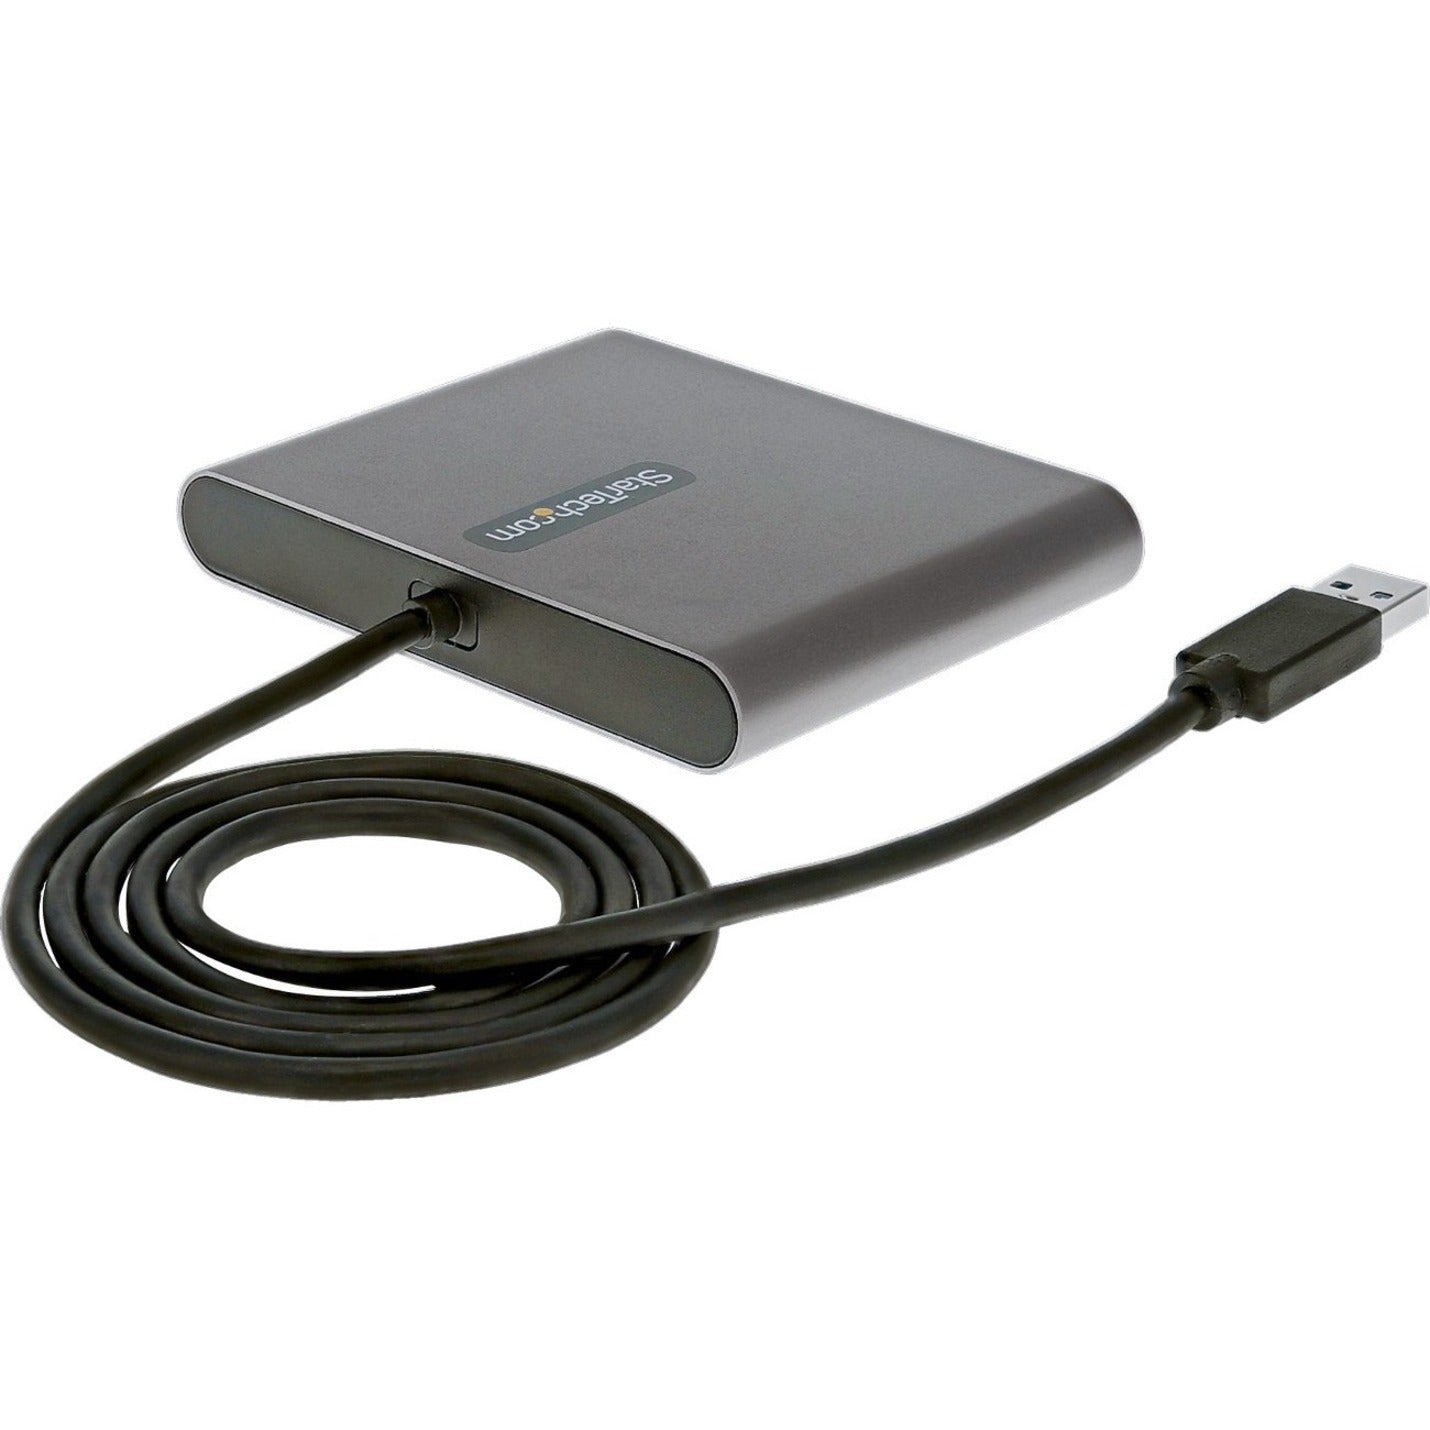 StarTech.com USB32HD4 USB-A to HDMI Adapter, 1920 x 1080, Space Gray, 2 Year Warranty